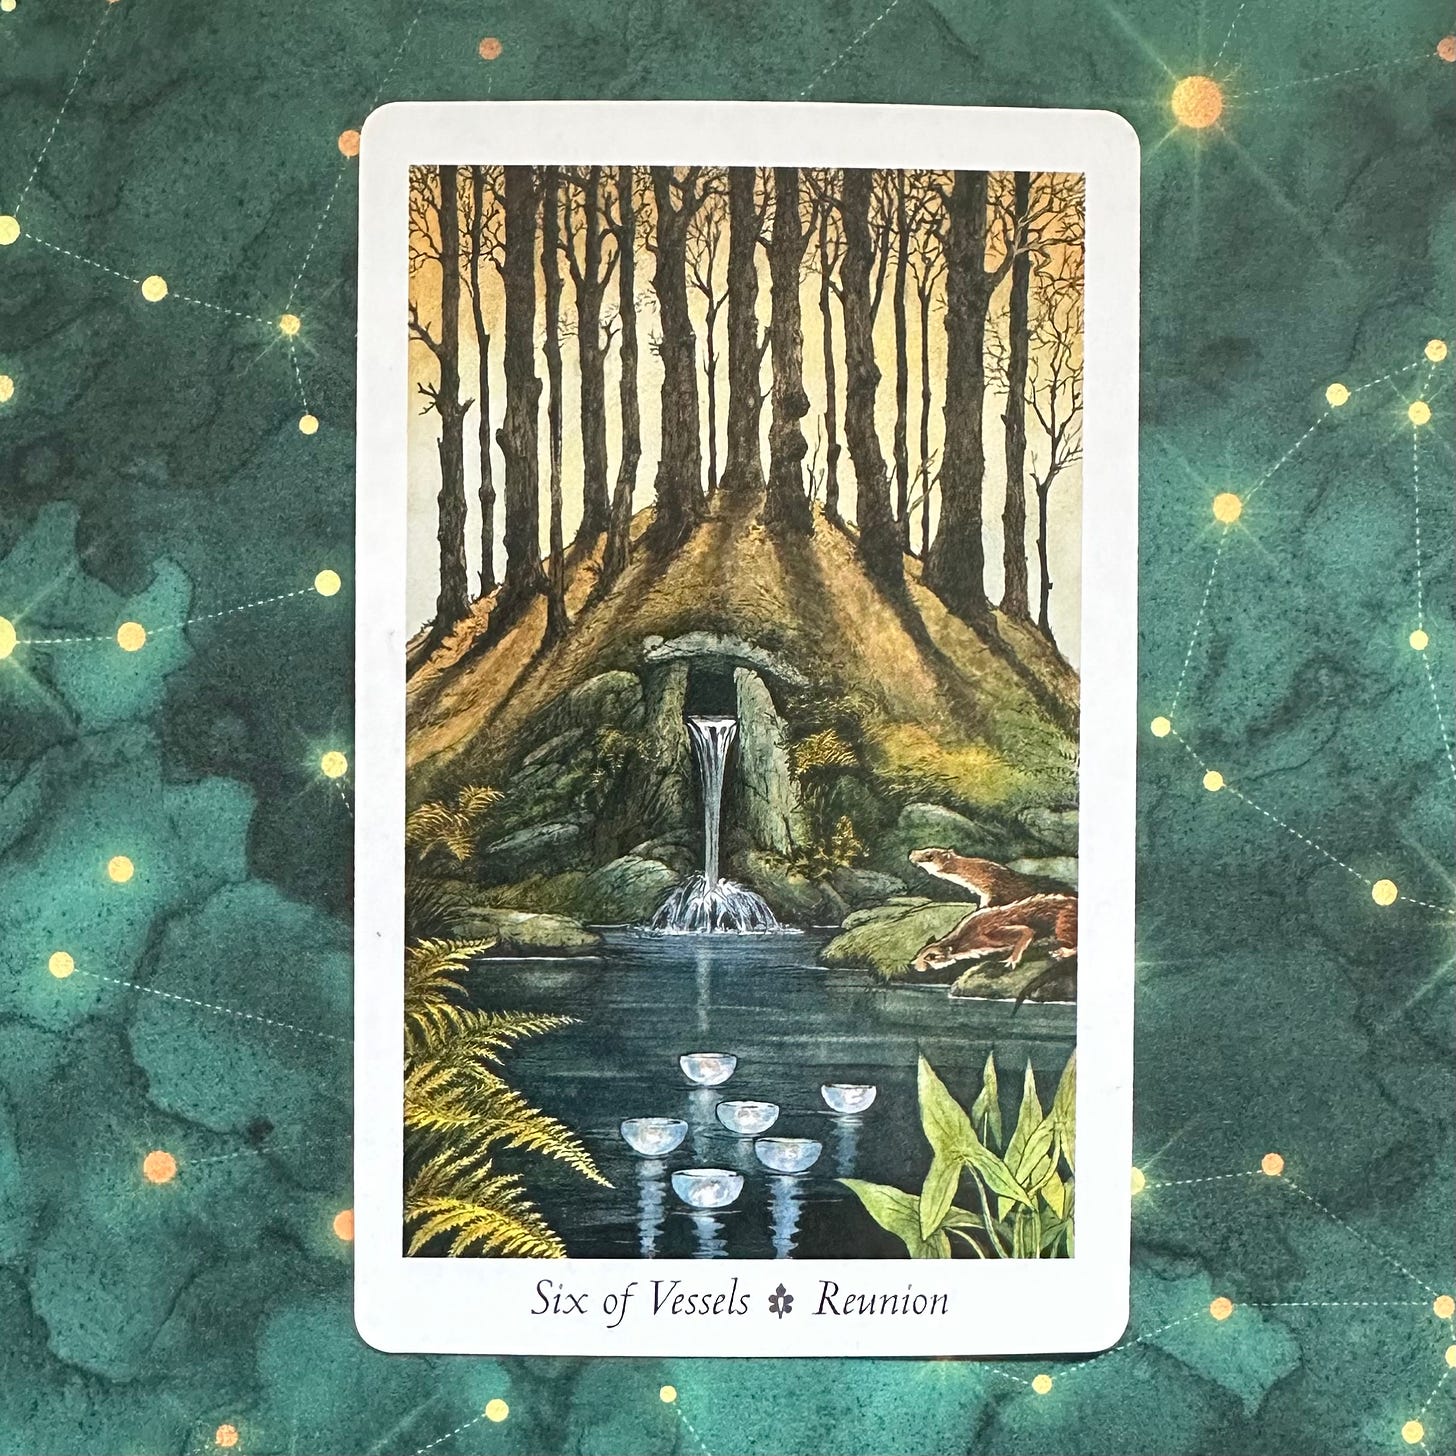 The Six of Vessel tarot card lying on top of a green fabric decorated with golden constellations. The card depicts a mound with trees growing on it, a spring coming out of rocks in its side and falling into a pool in front of it. On the surface of the pool are six floating bowls with lights inside them and two otters are on the pool's bank, one looking into the water, one looking at the mound. The quality of light gives the whole thing and autumnal feel.